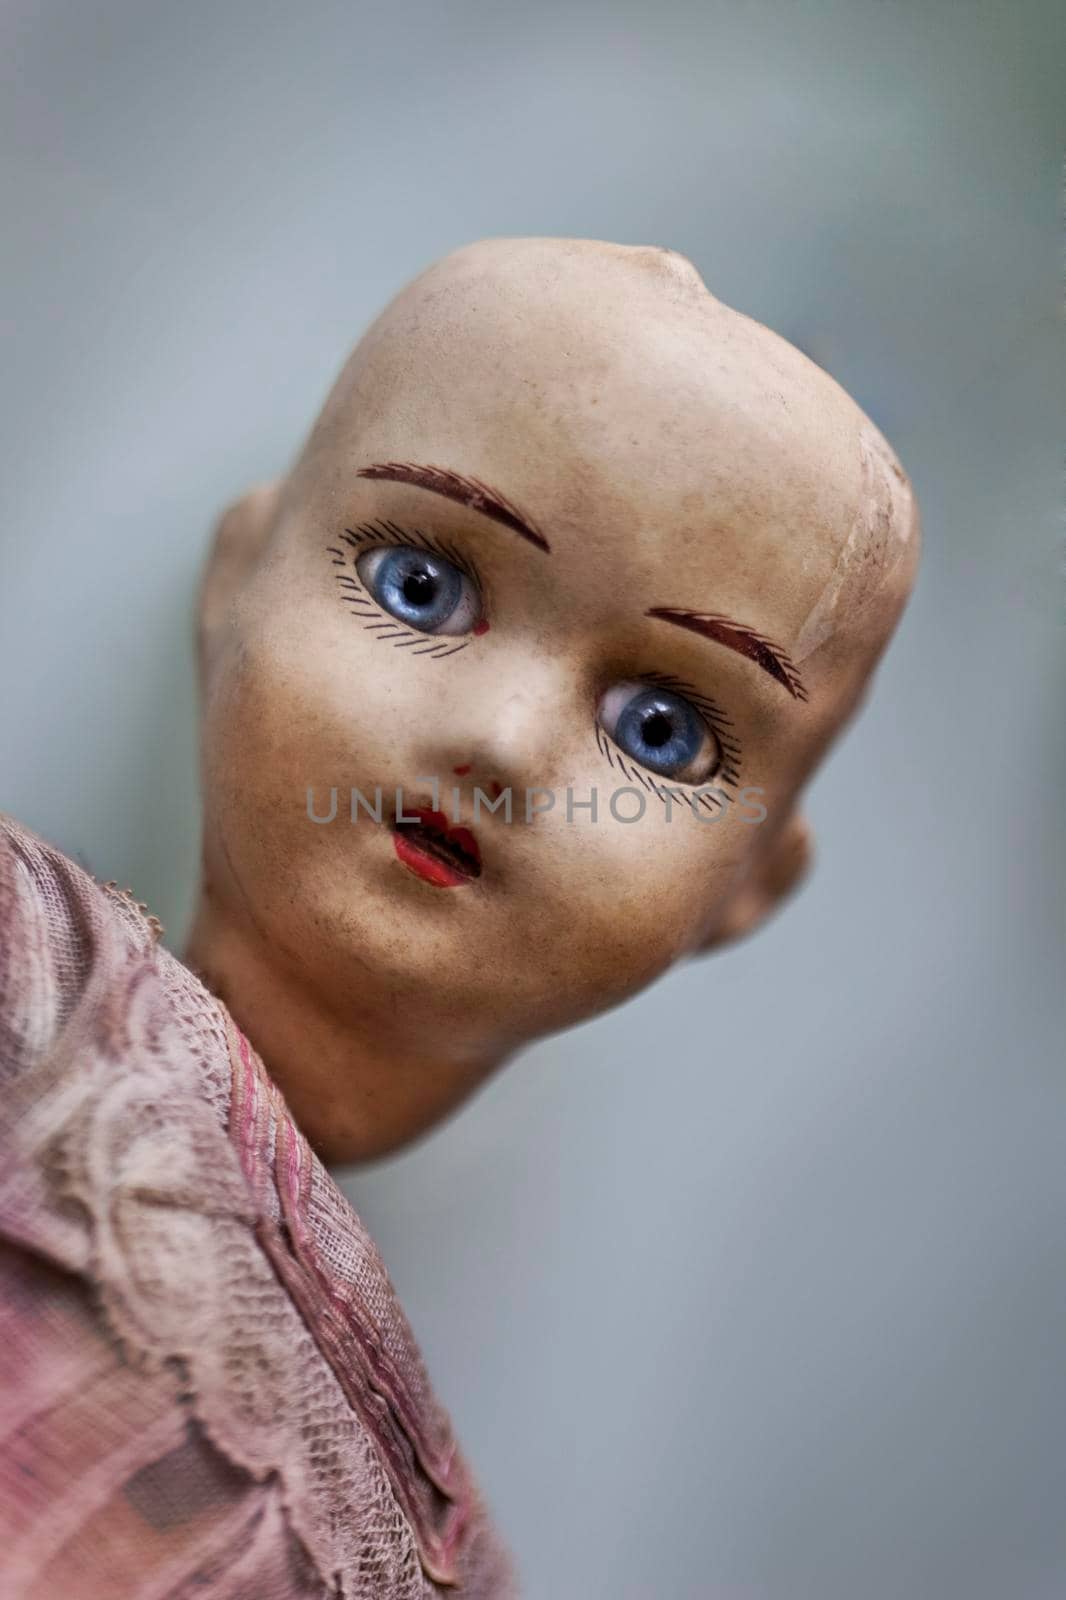 Old porcelain doll by jacques_palut